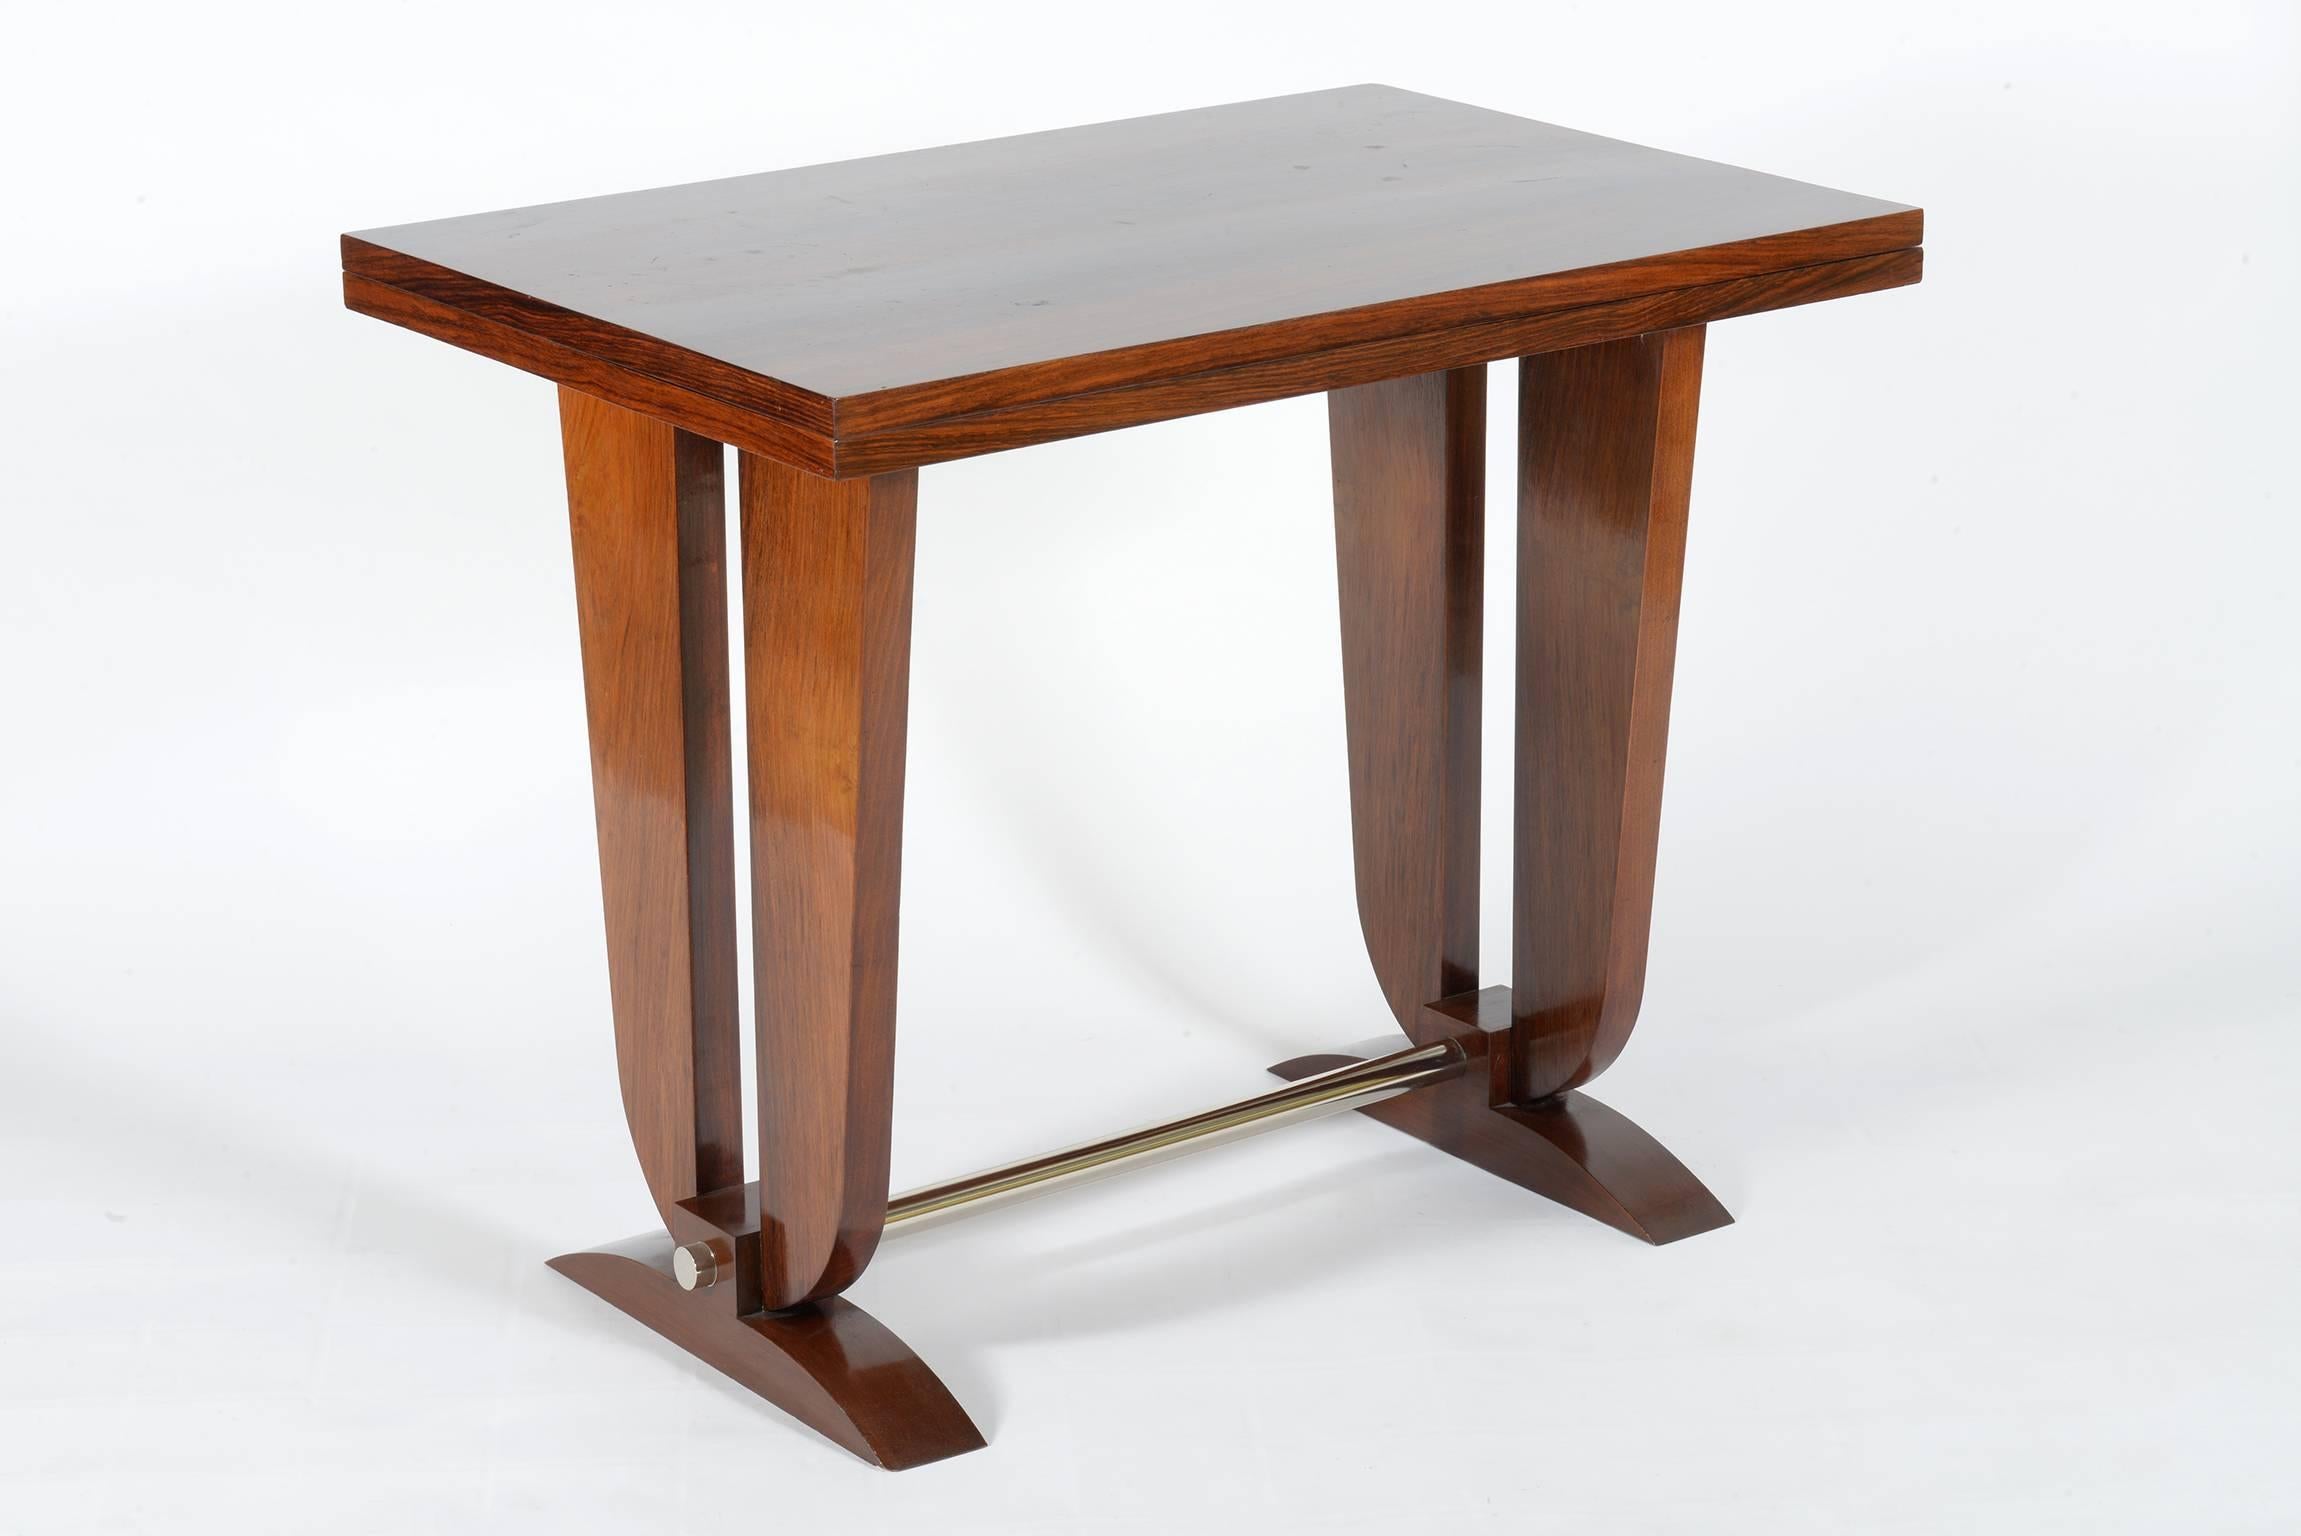 Two side supports joined by a chromed brass footrest bar.
The top rotates to open it and doubled.
Precious exotic wood is on the top when closed and opened.
When the table is open the measuere of the top are: cm 120 x 90
inches 47 x 35.5.